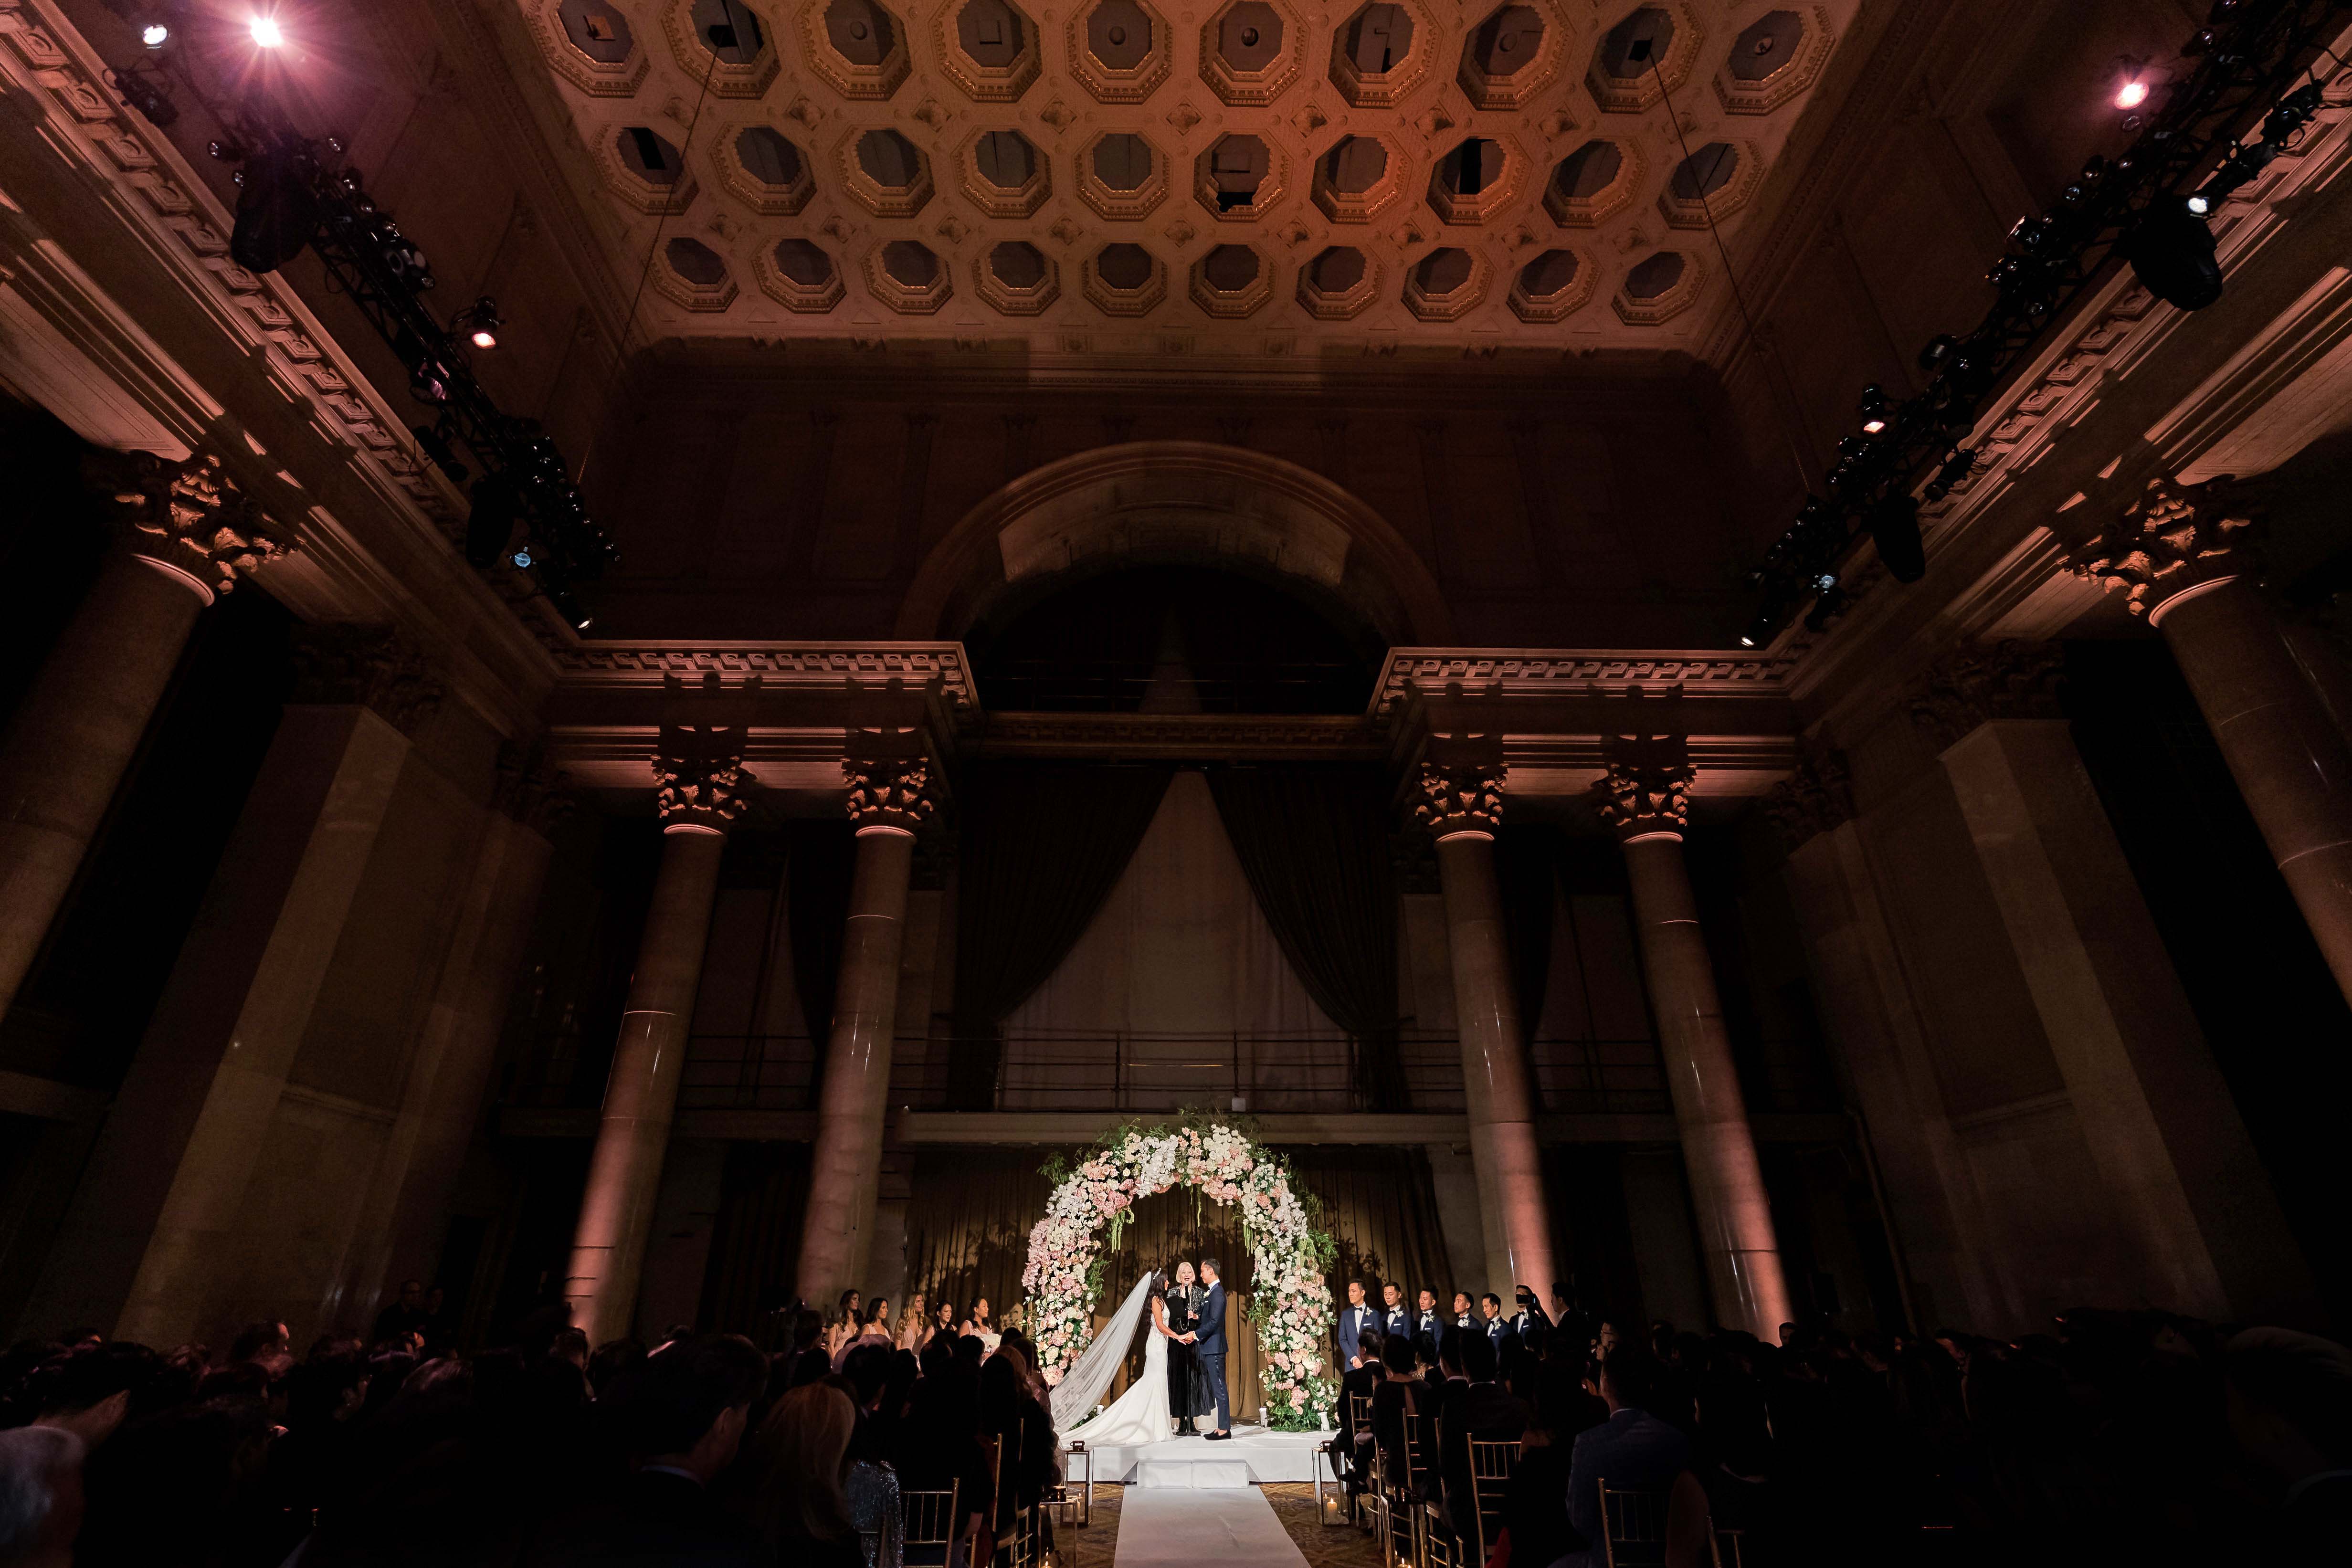 Top Wedding Venue Nyc Affordable in the world Check it out now 